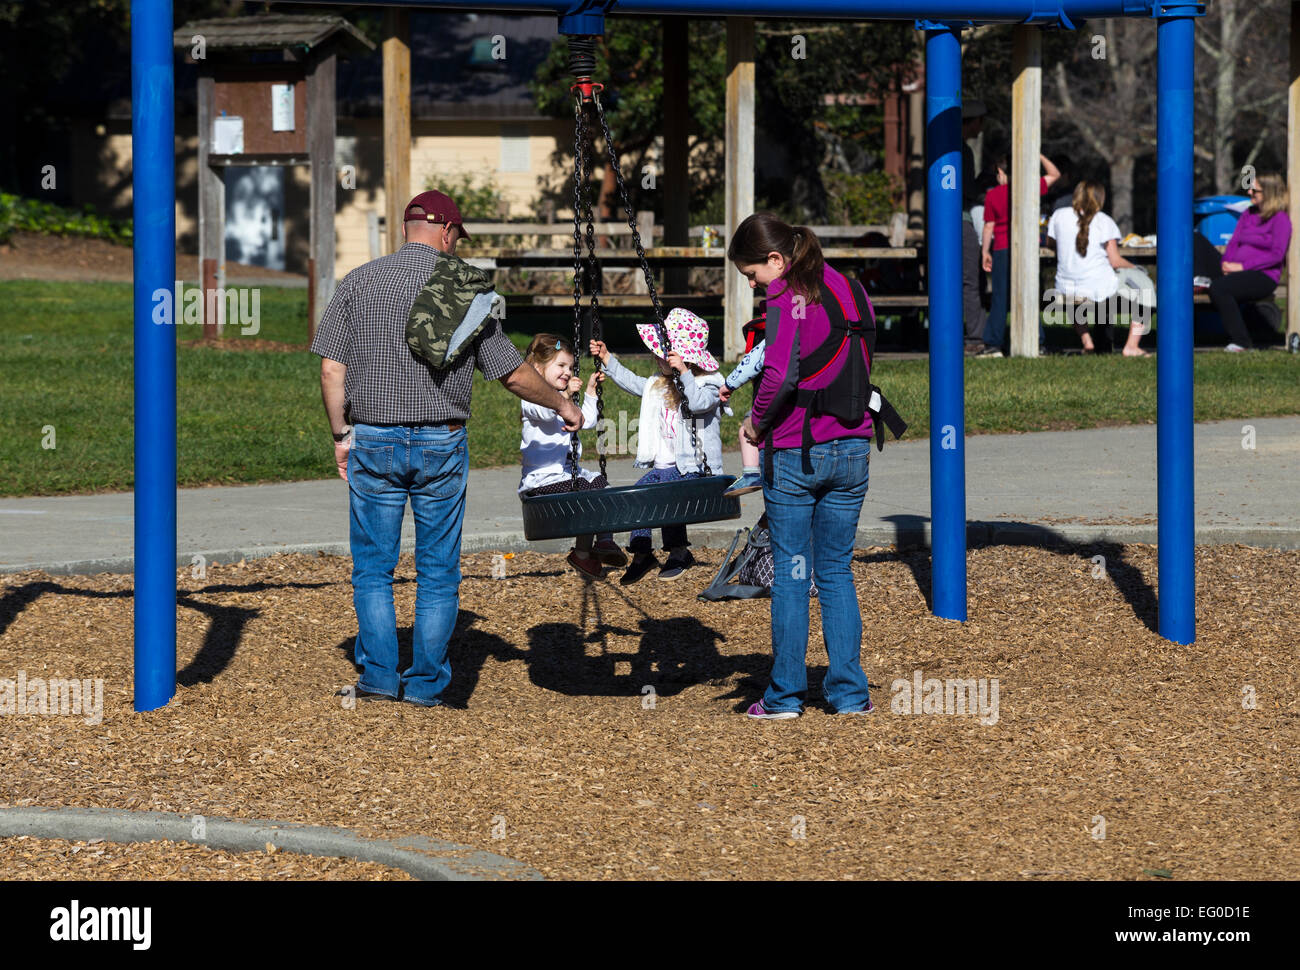 Parents, young girls, children, on swing, playground, Pioneer Park, city, Novato, California, United States Stock Photo